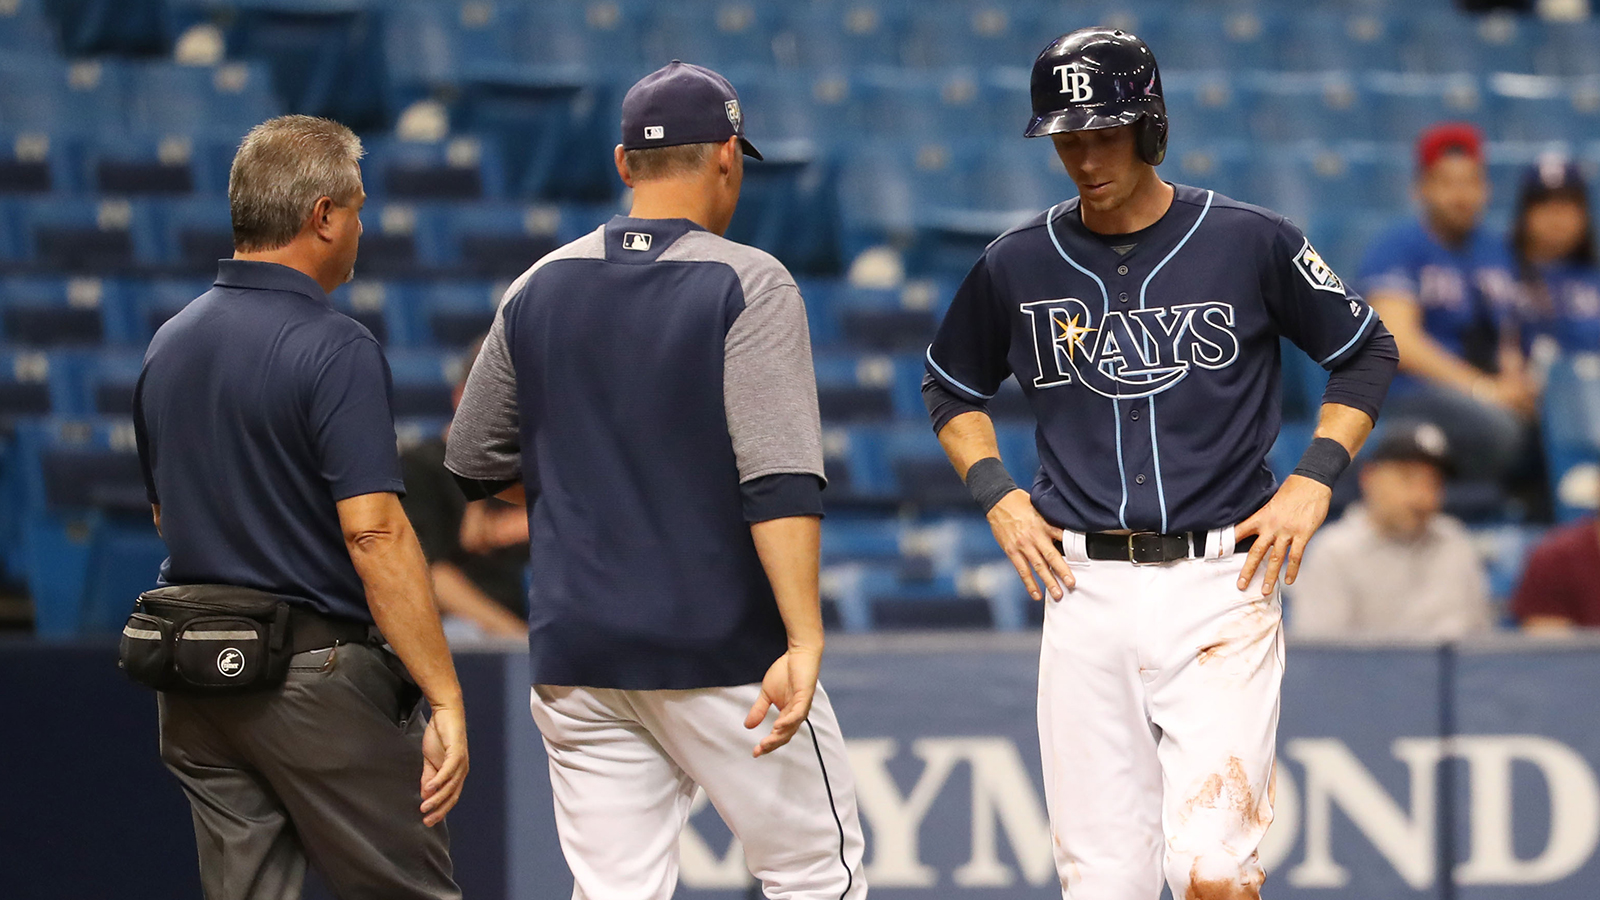 Rays place Matt Duffy on 10-day disabled list, transfer Kevin Kiermaier to 60-day DL